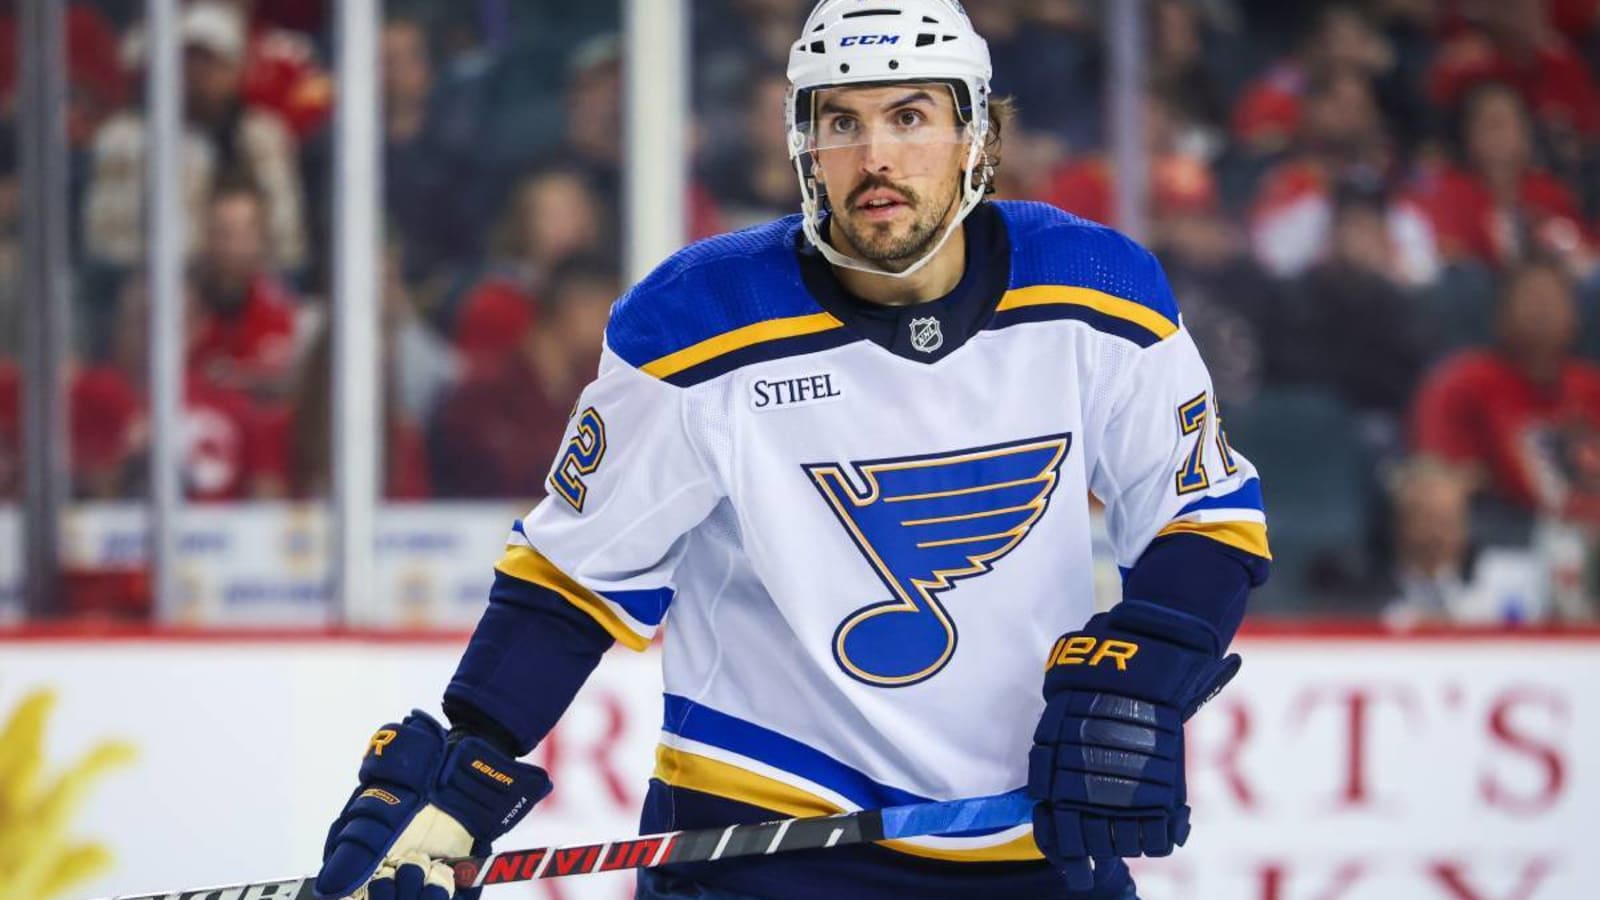 St. Louis Blues place defenseman Justin Faulk on injured reserve with a lower-body injury